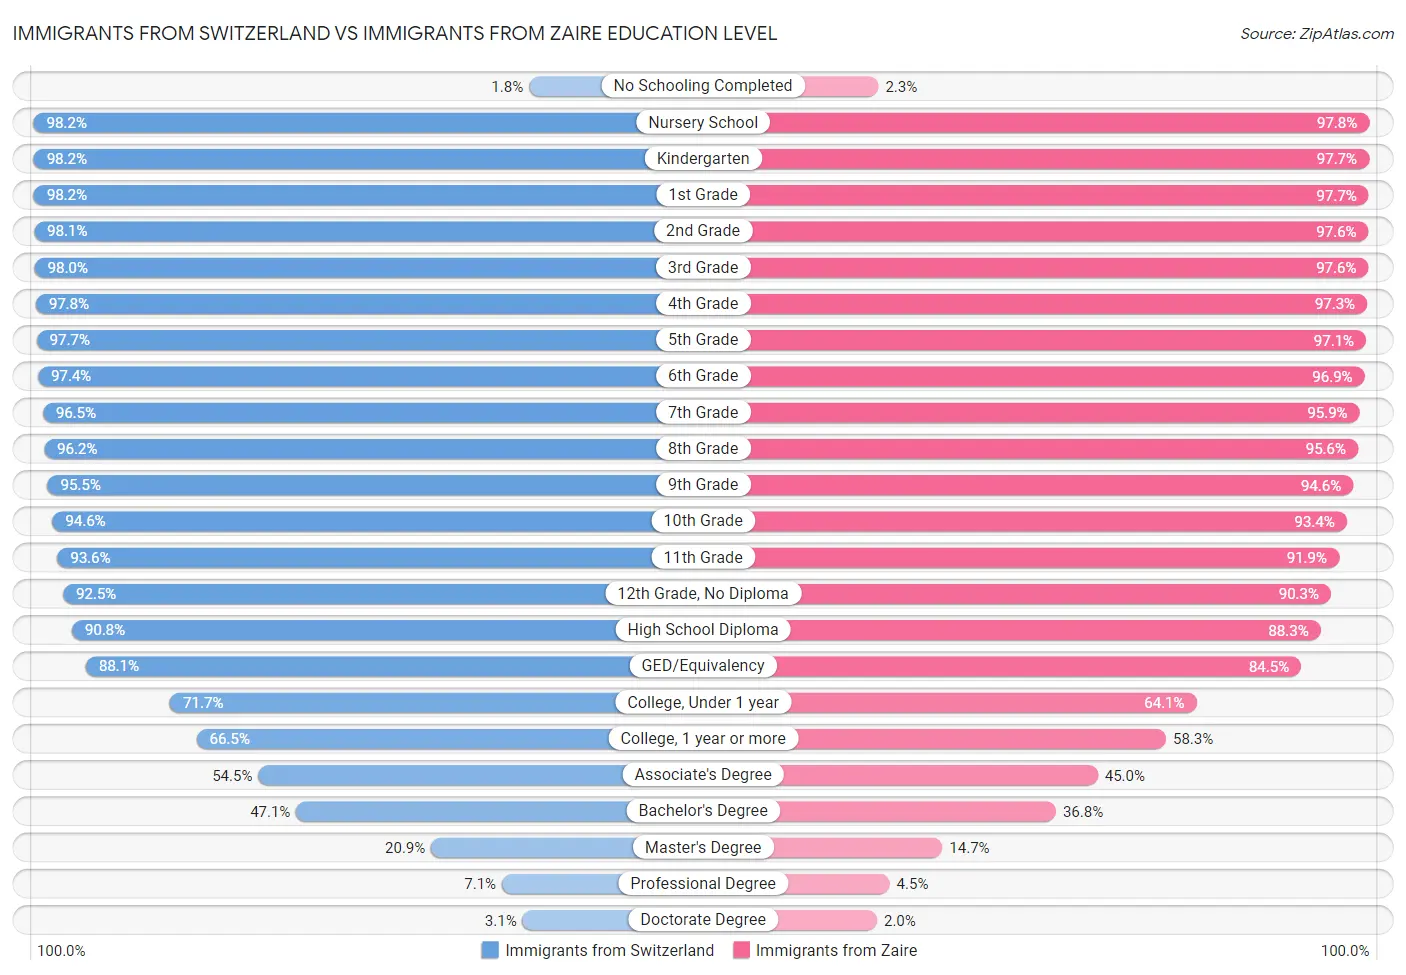 Immigrants from Switzerland vs Immigrants from Zaire Education Level